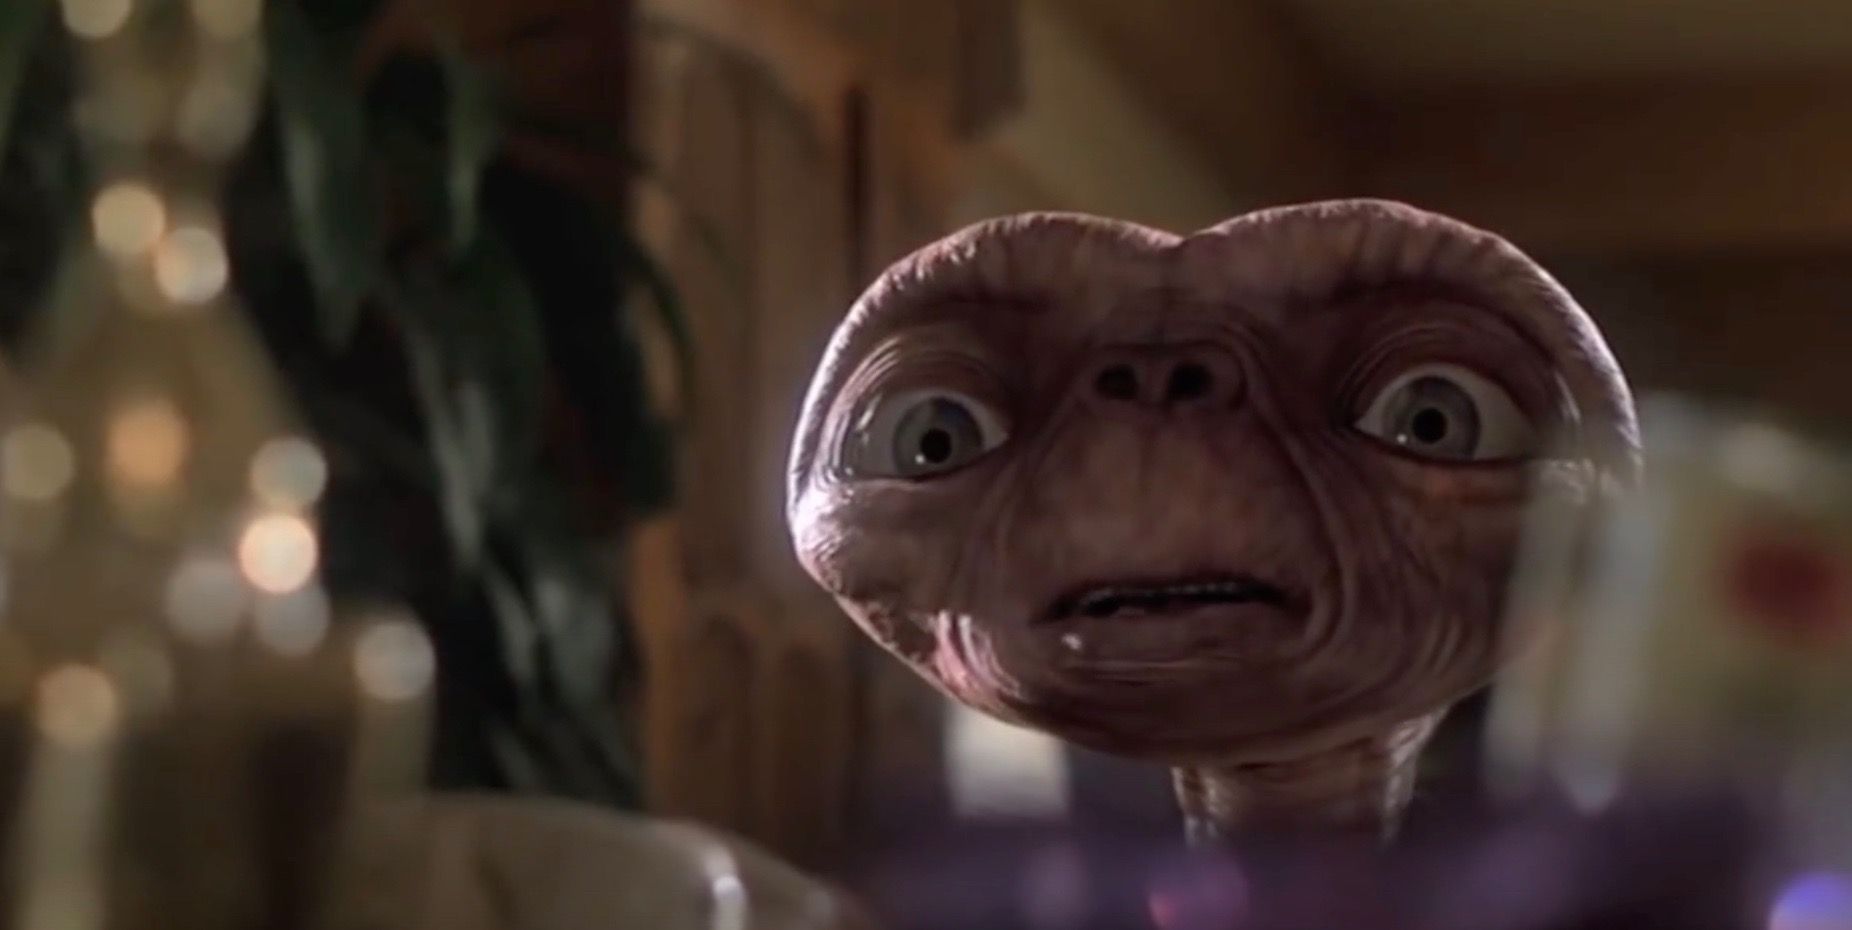 E.T. looking scared while watching TV.